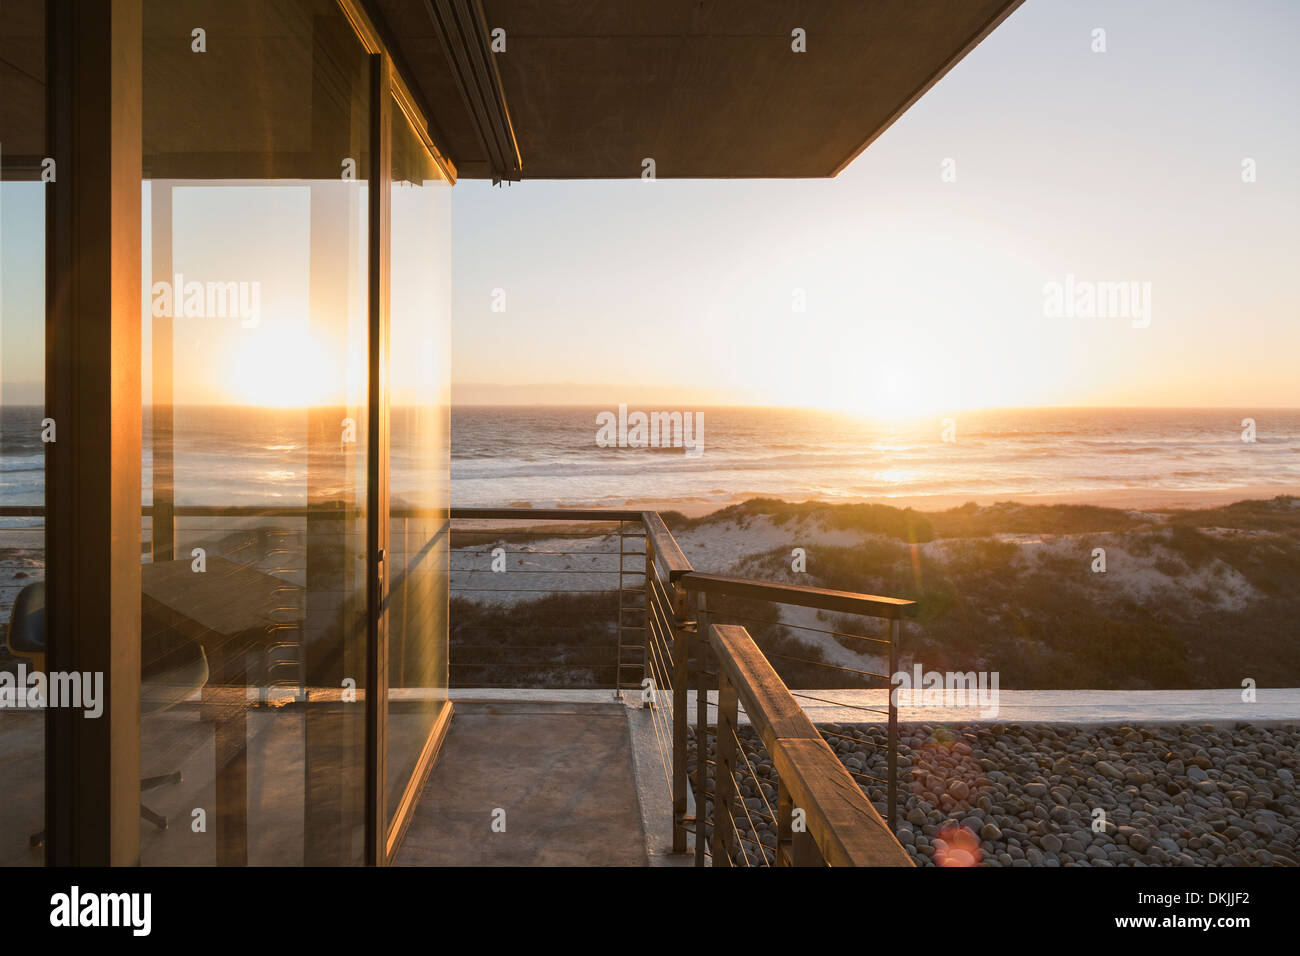 View of sunset over ocean from balcony of modern house Stock Photo